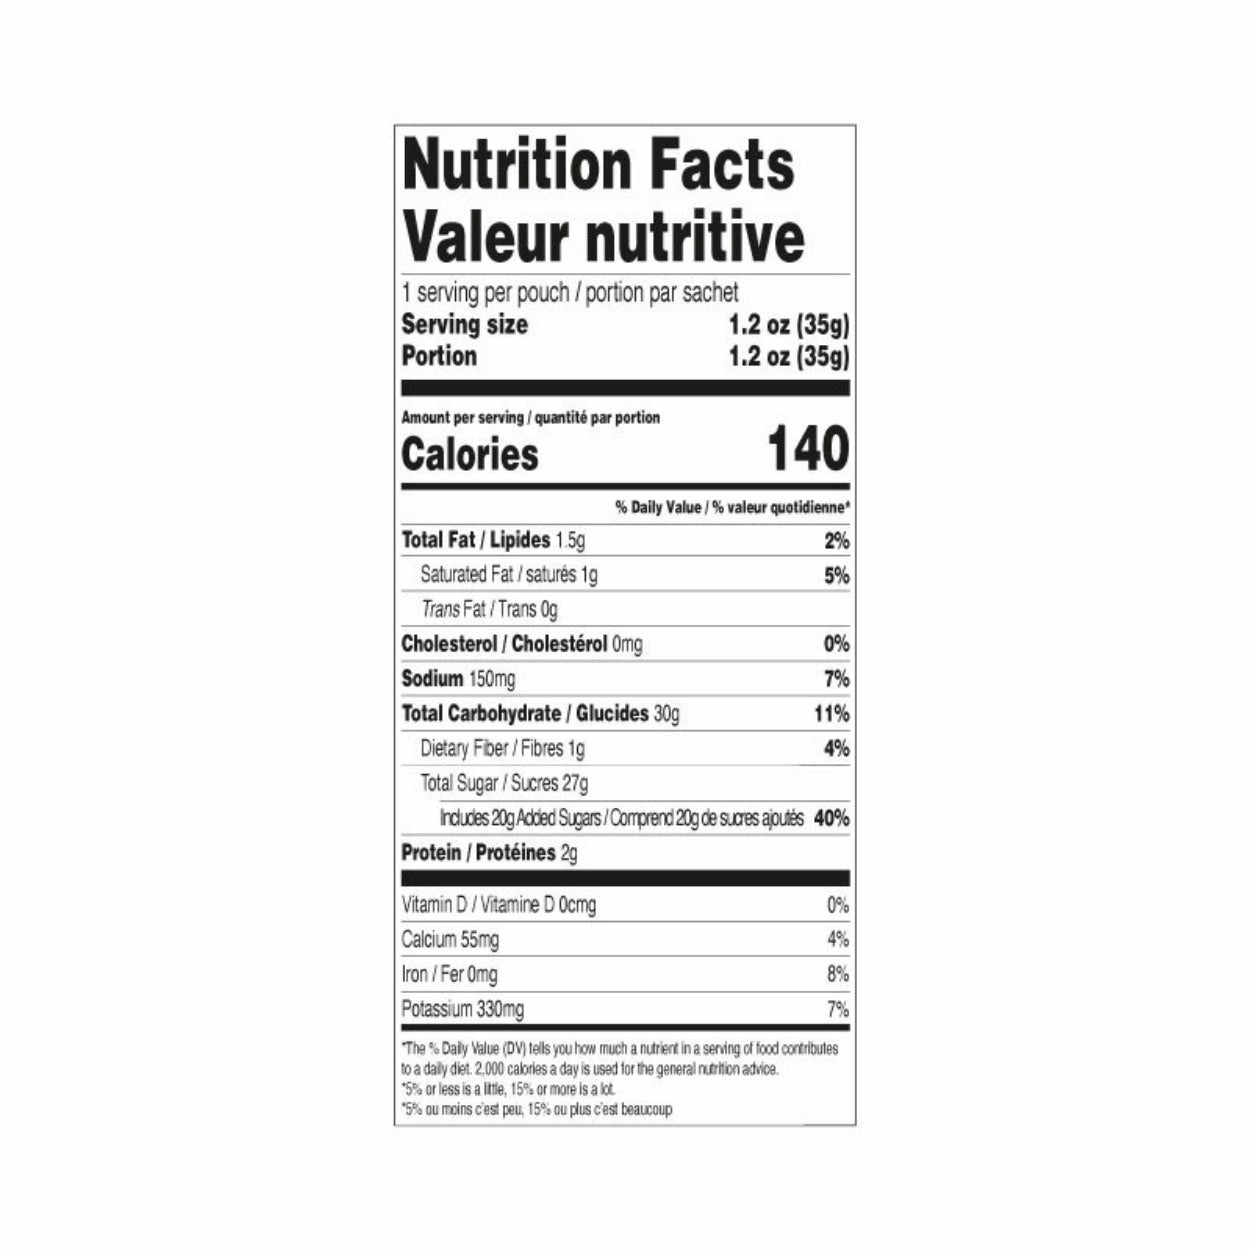 Mini Hot Chocolate- Gingerbread Nutrition Facts Label